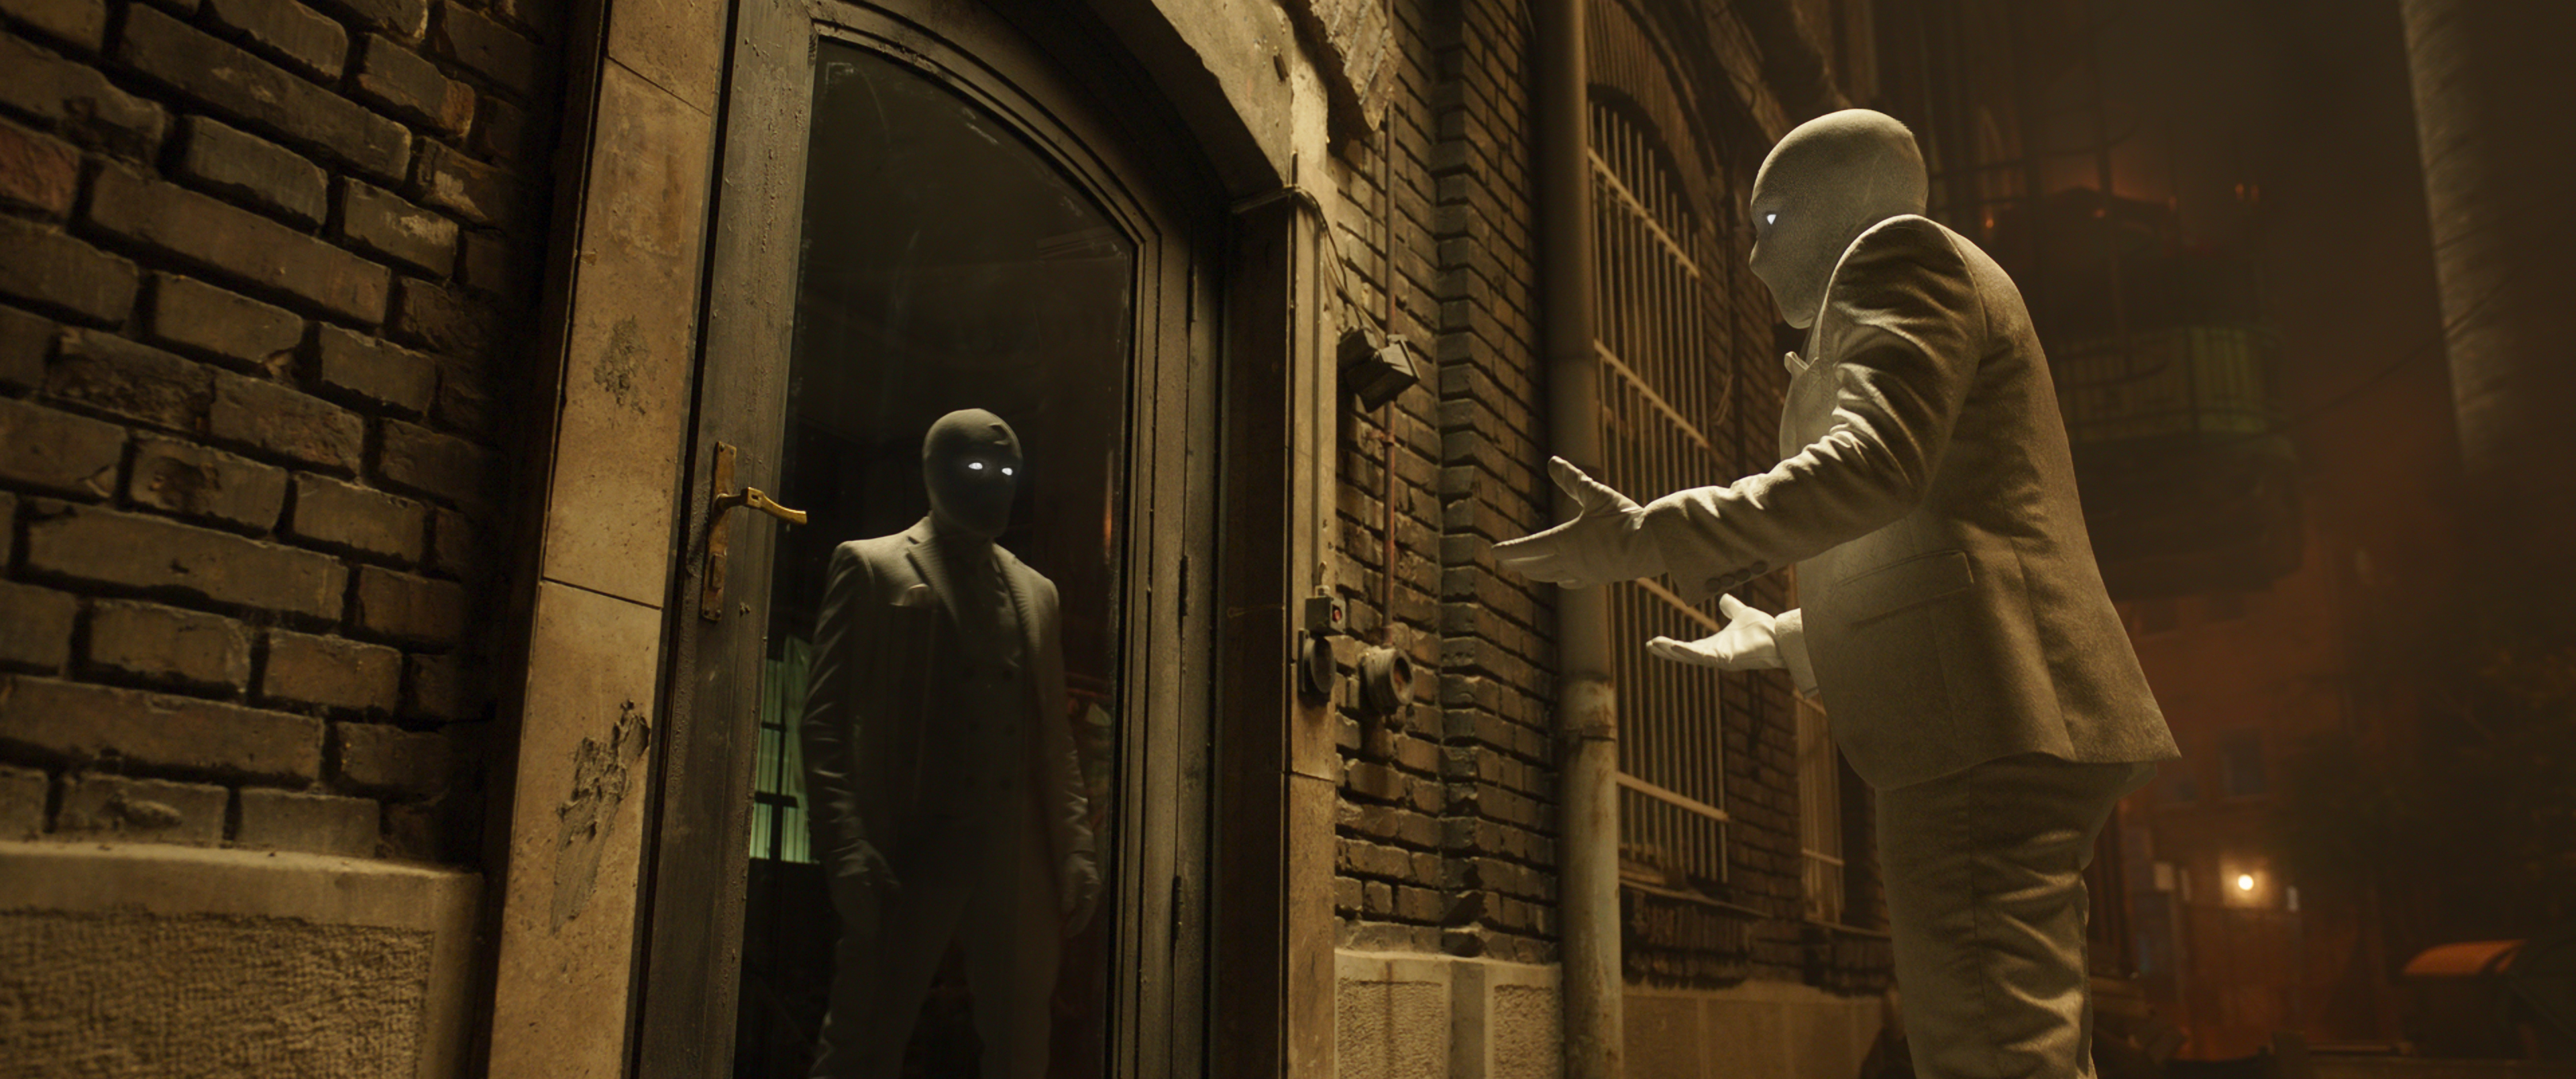 ‘Moon Knight’ Episode 2 Review: “Summon the Suit”